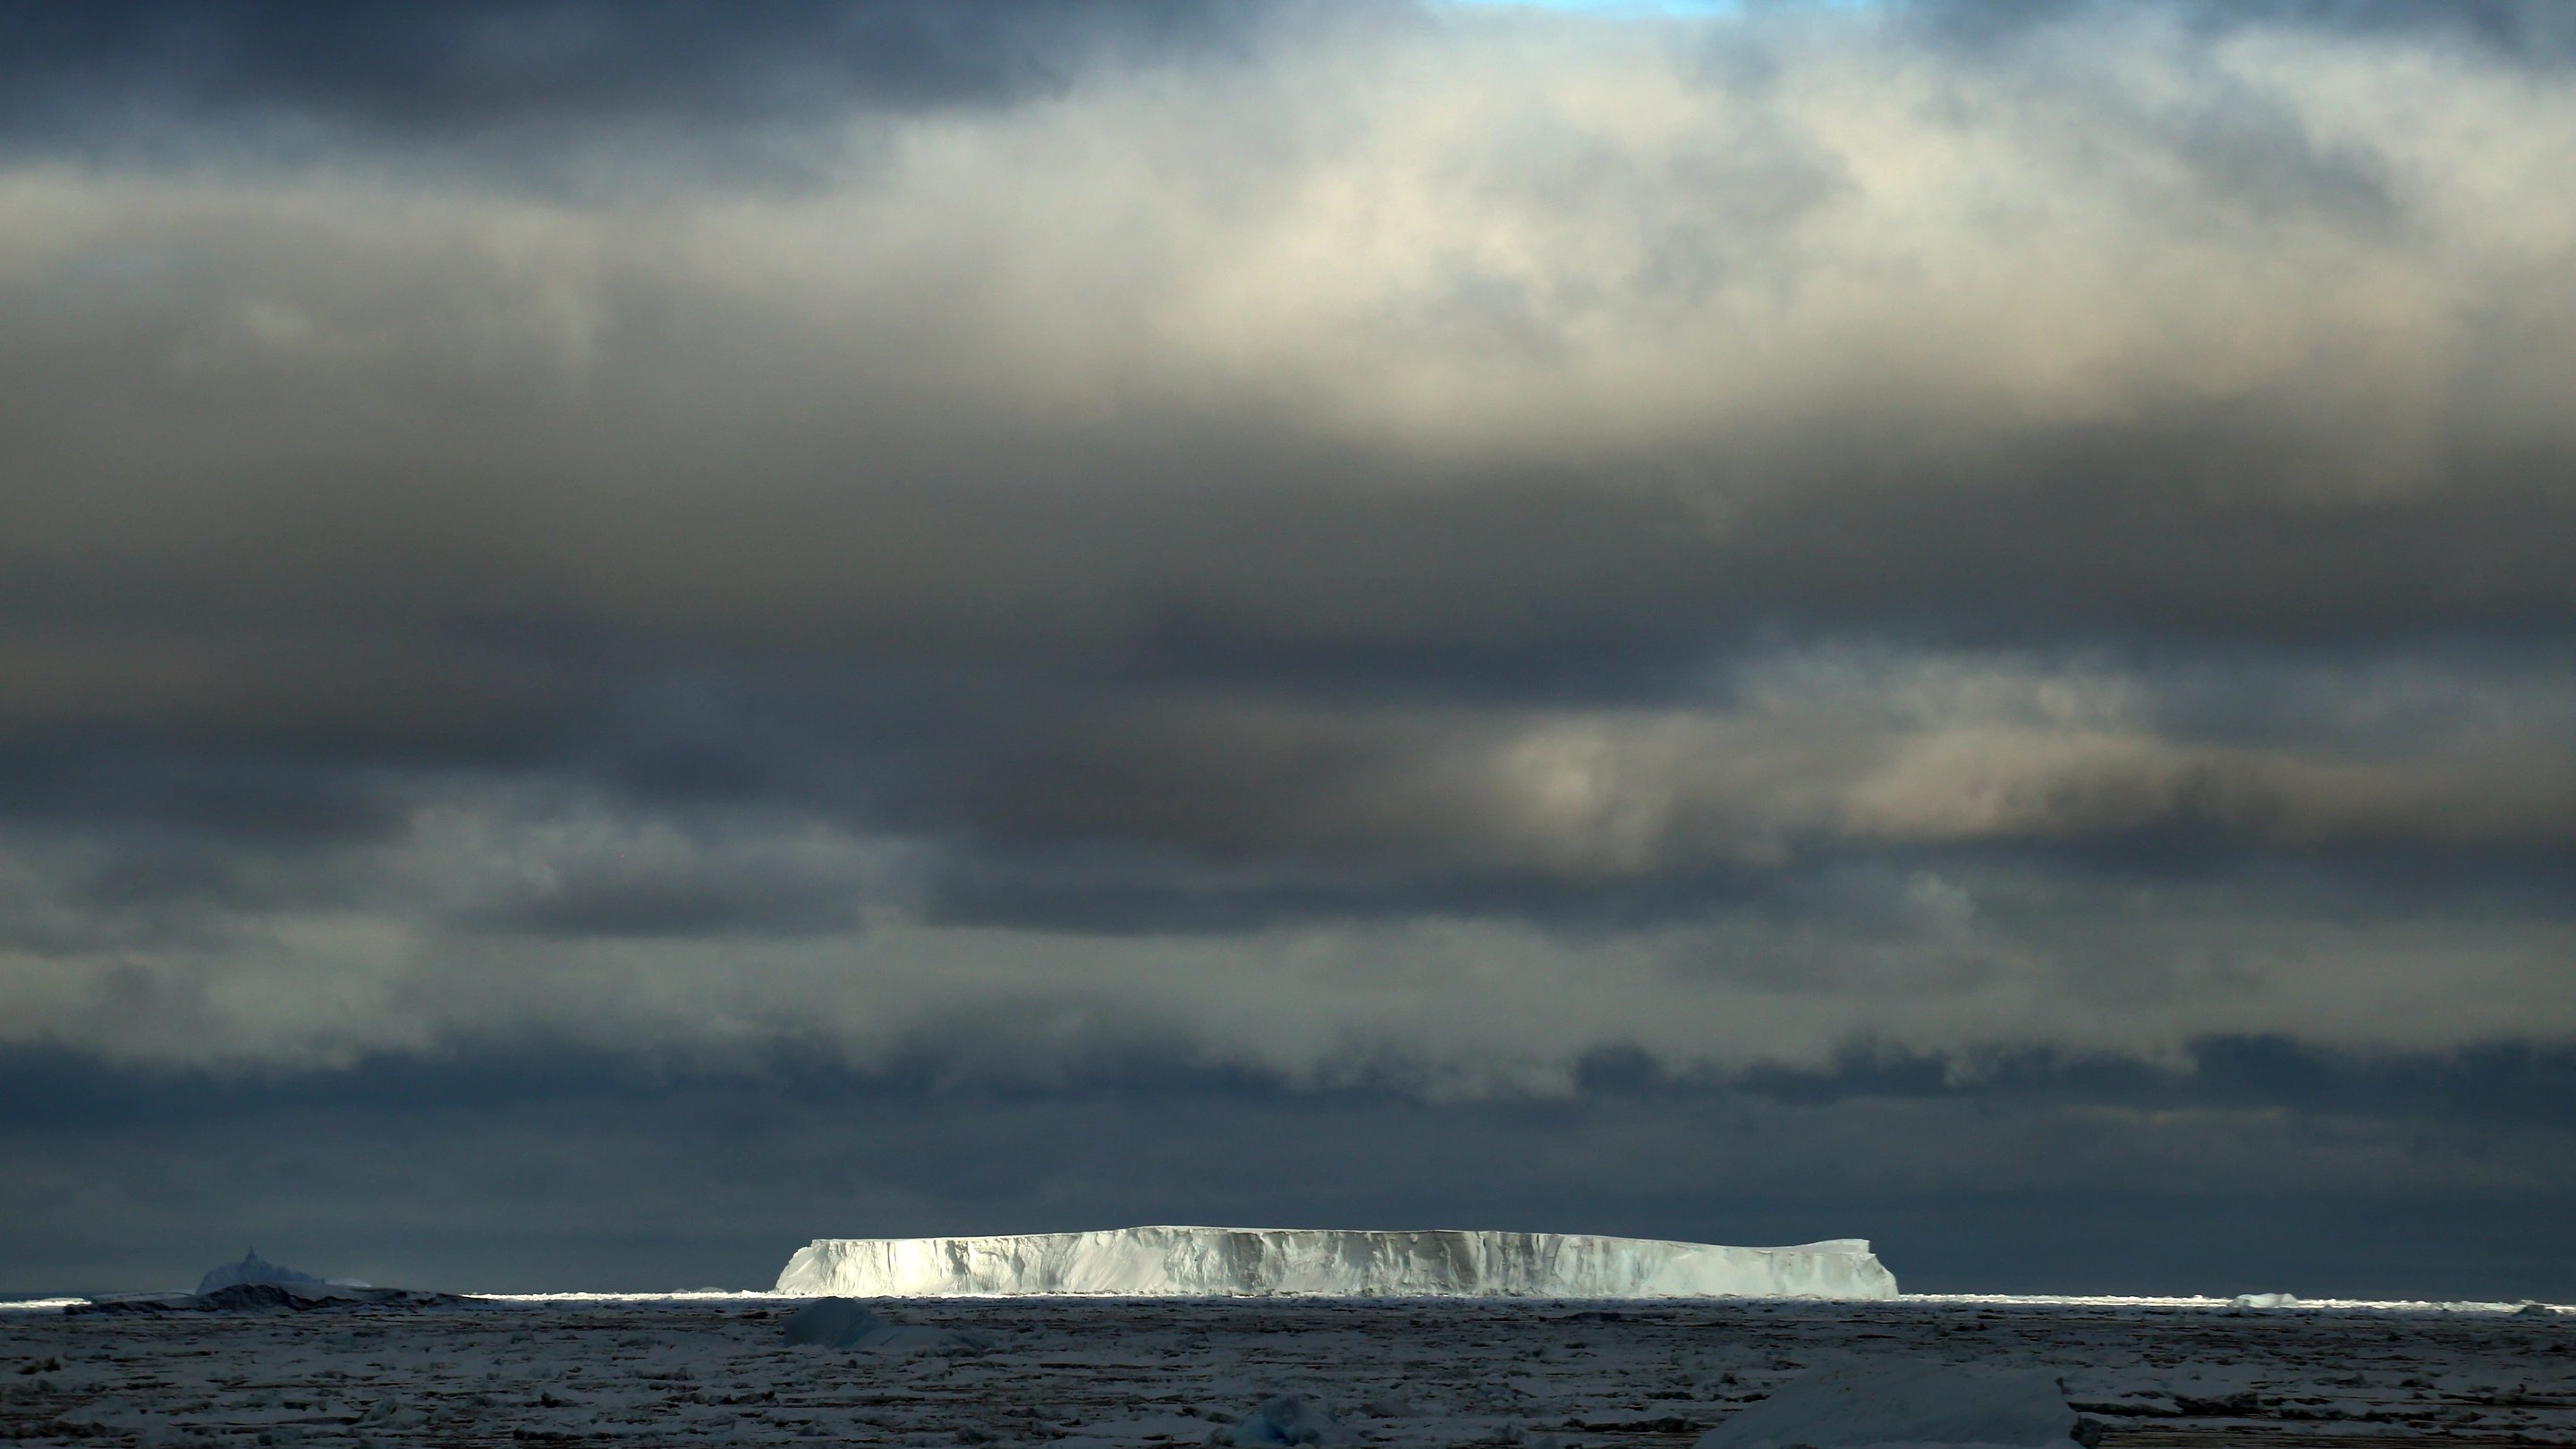 An iceberg calved from the Thwaites Glacier in the Amundsen Sea in 2019, viewed from the R/V Nathaniel B. Palmer. Photo: Elizabeth Rush